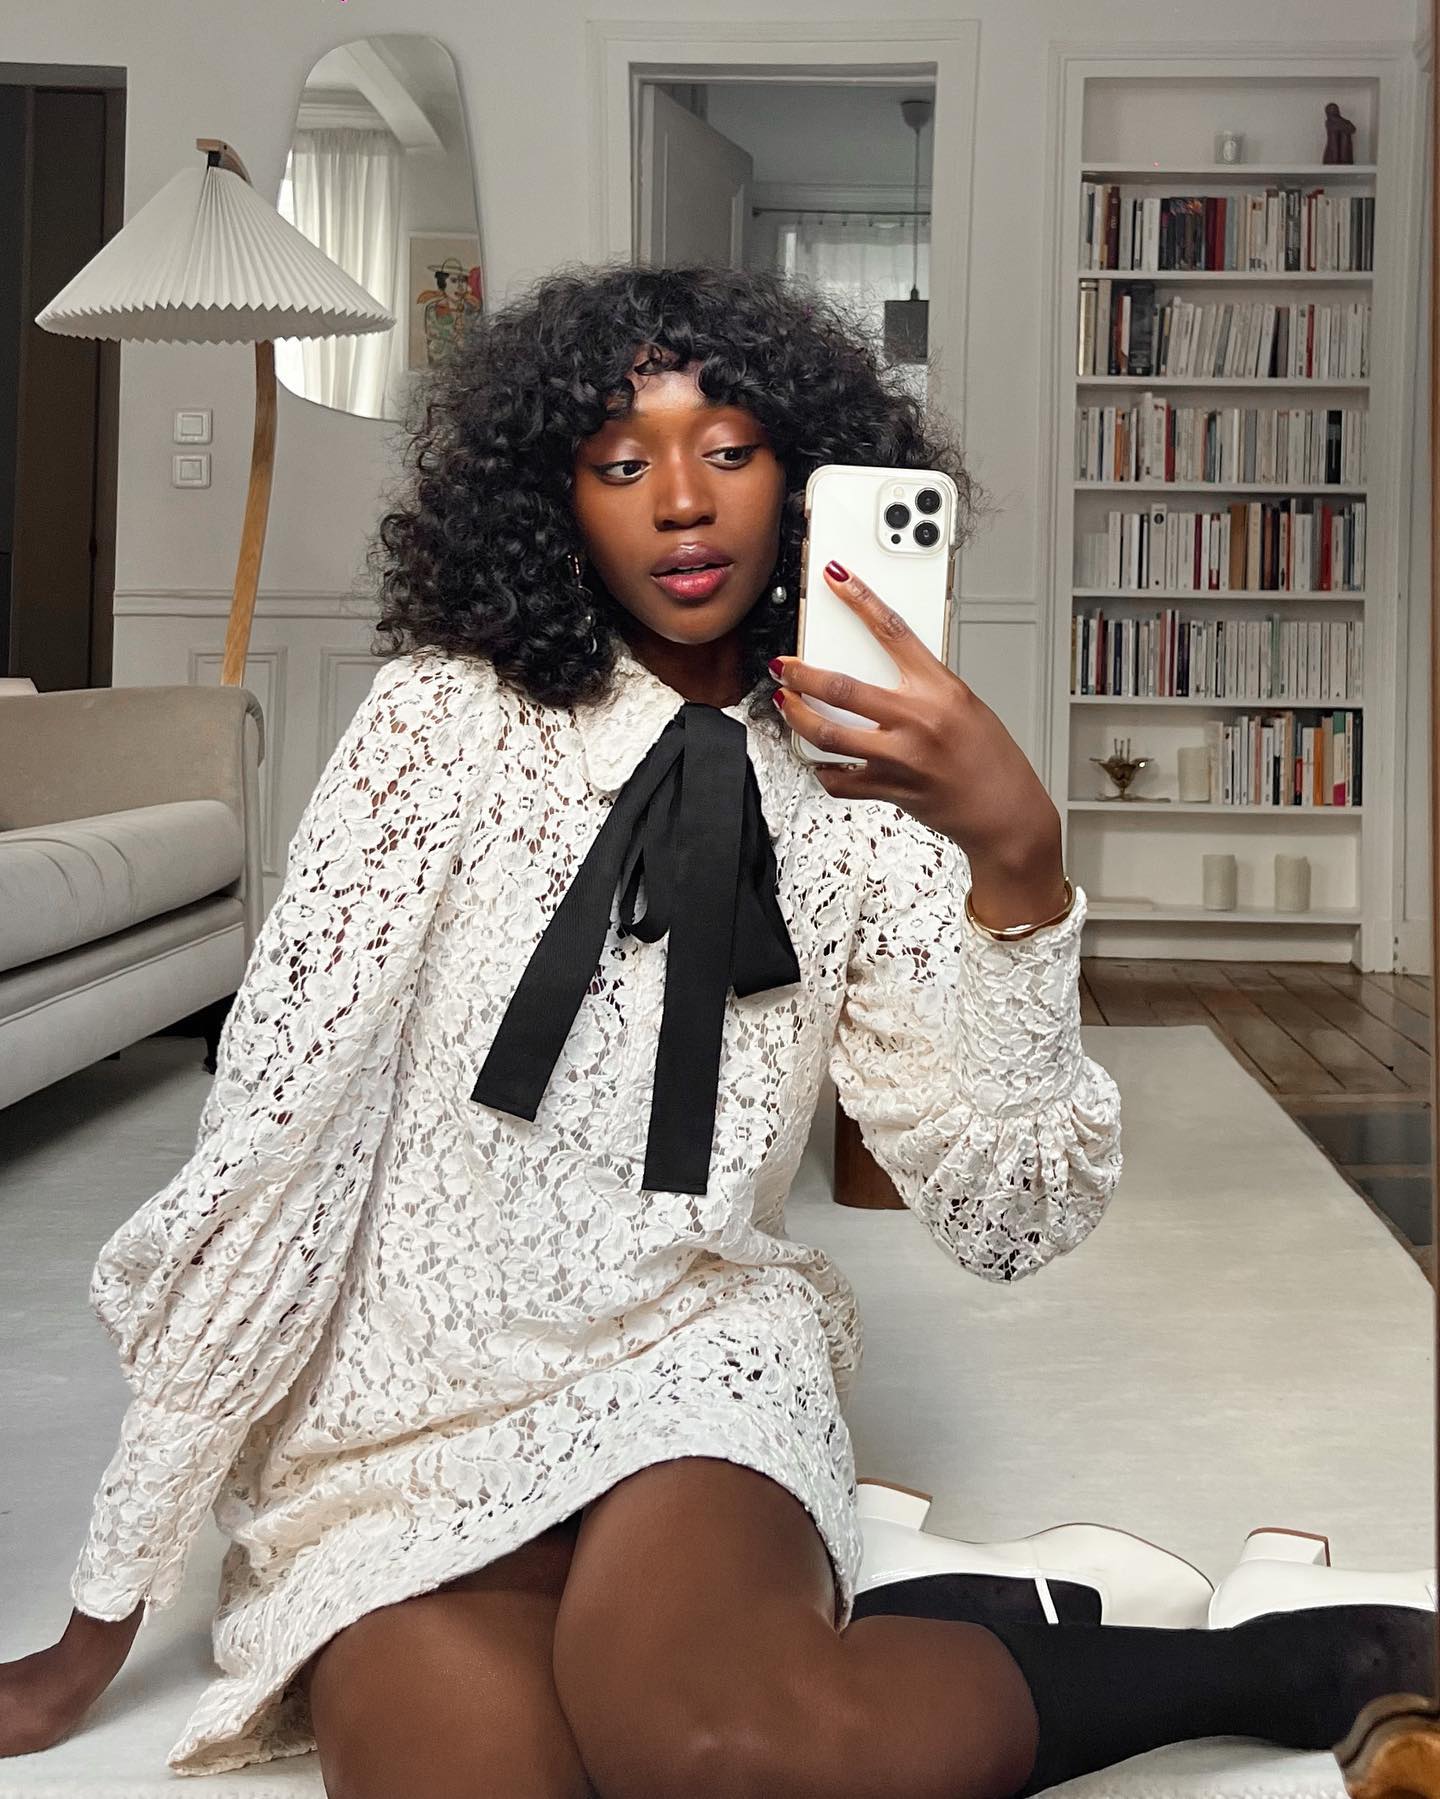 Influencer wears dress with elongated sleeves